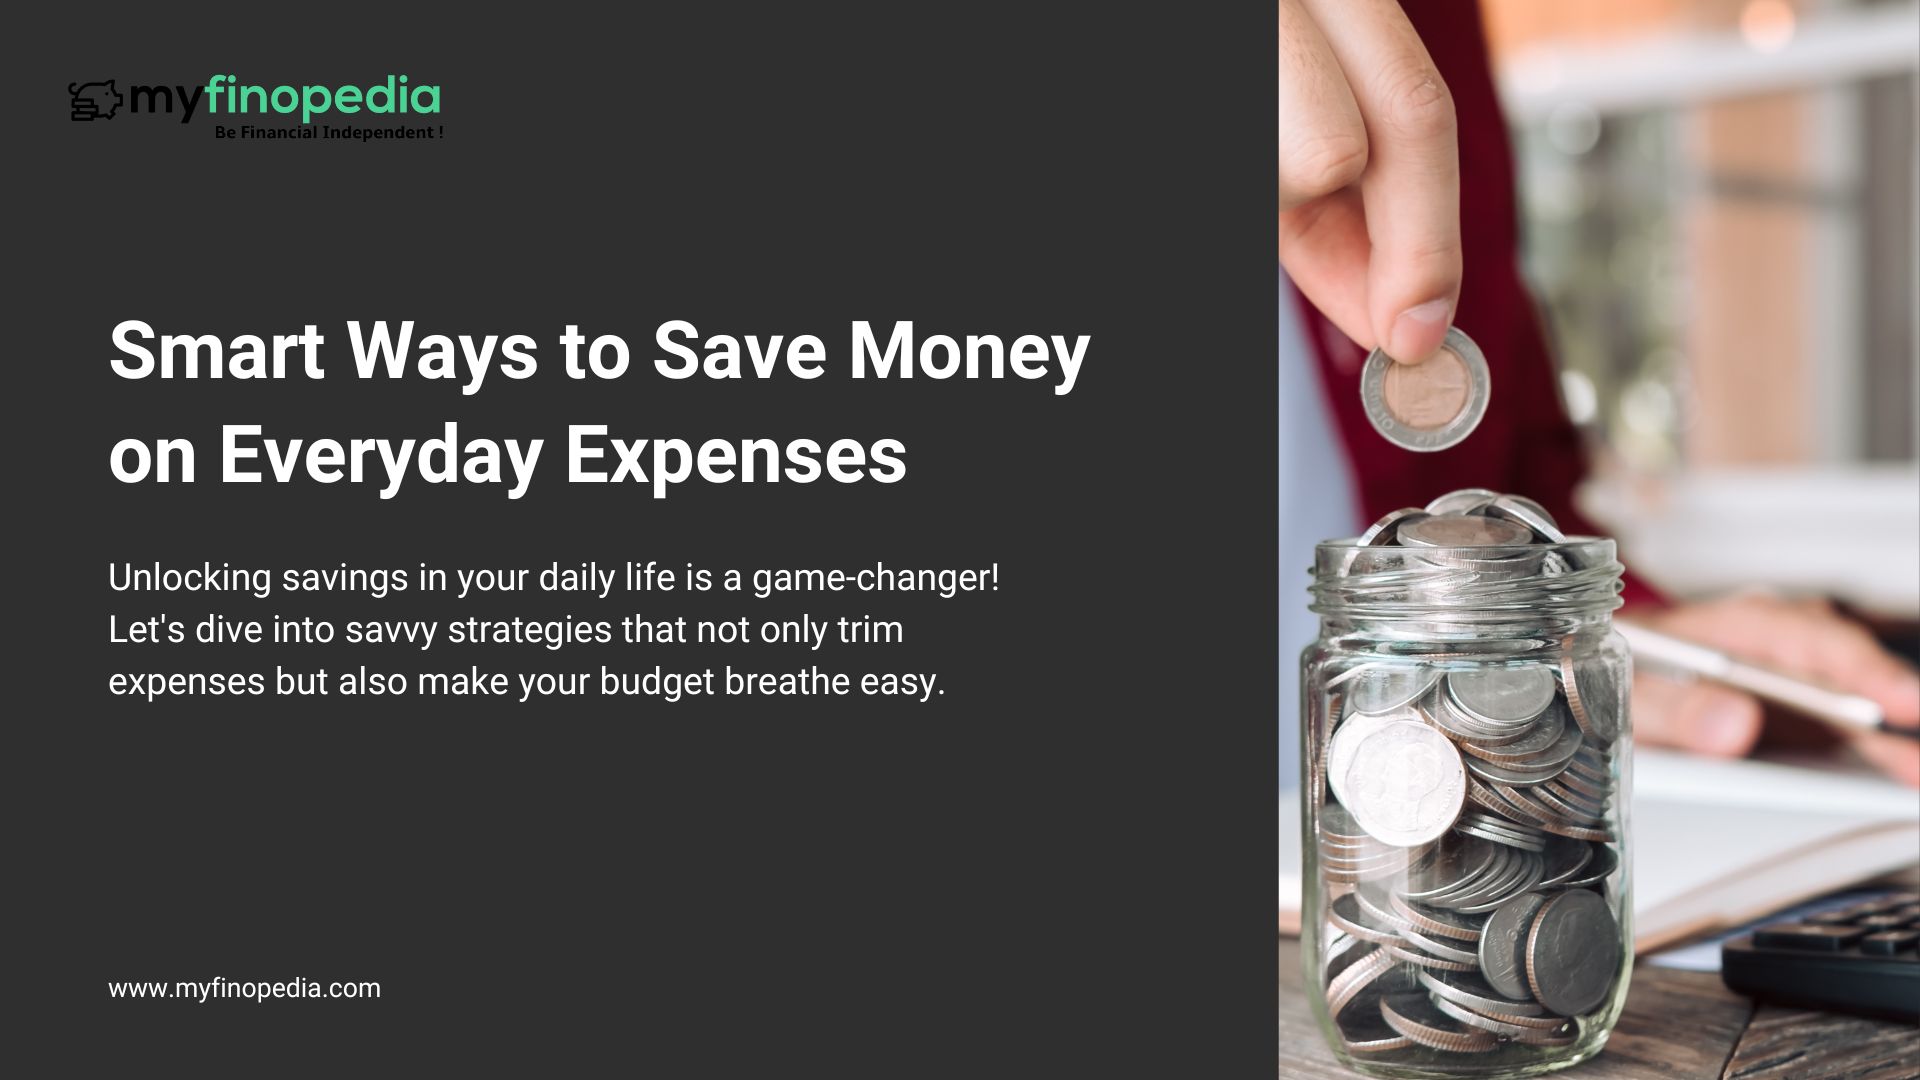 Smart Ways to Save Money on Everyday Expenses